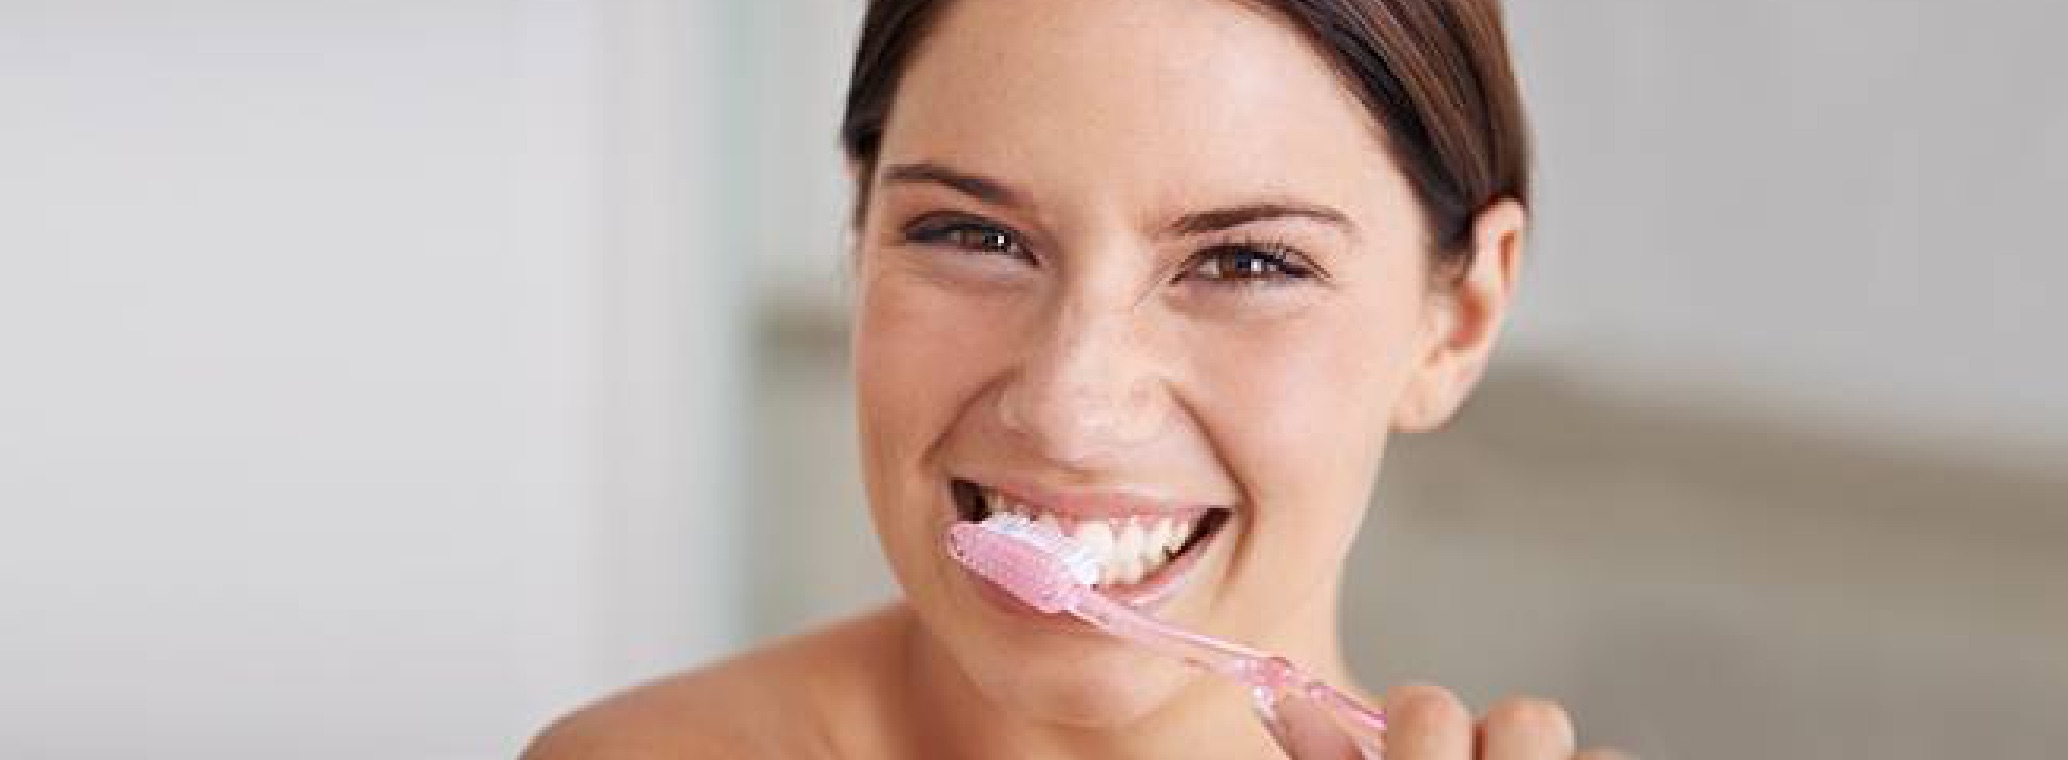 Clean Teeth: How to Clean Your Teeth for a Healthy Mouth